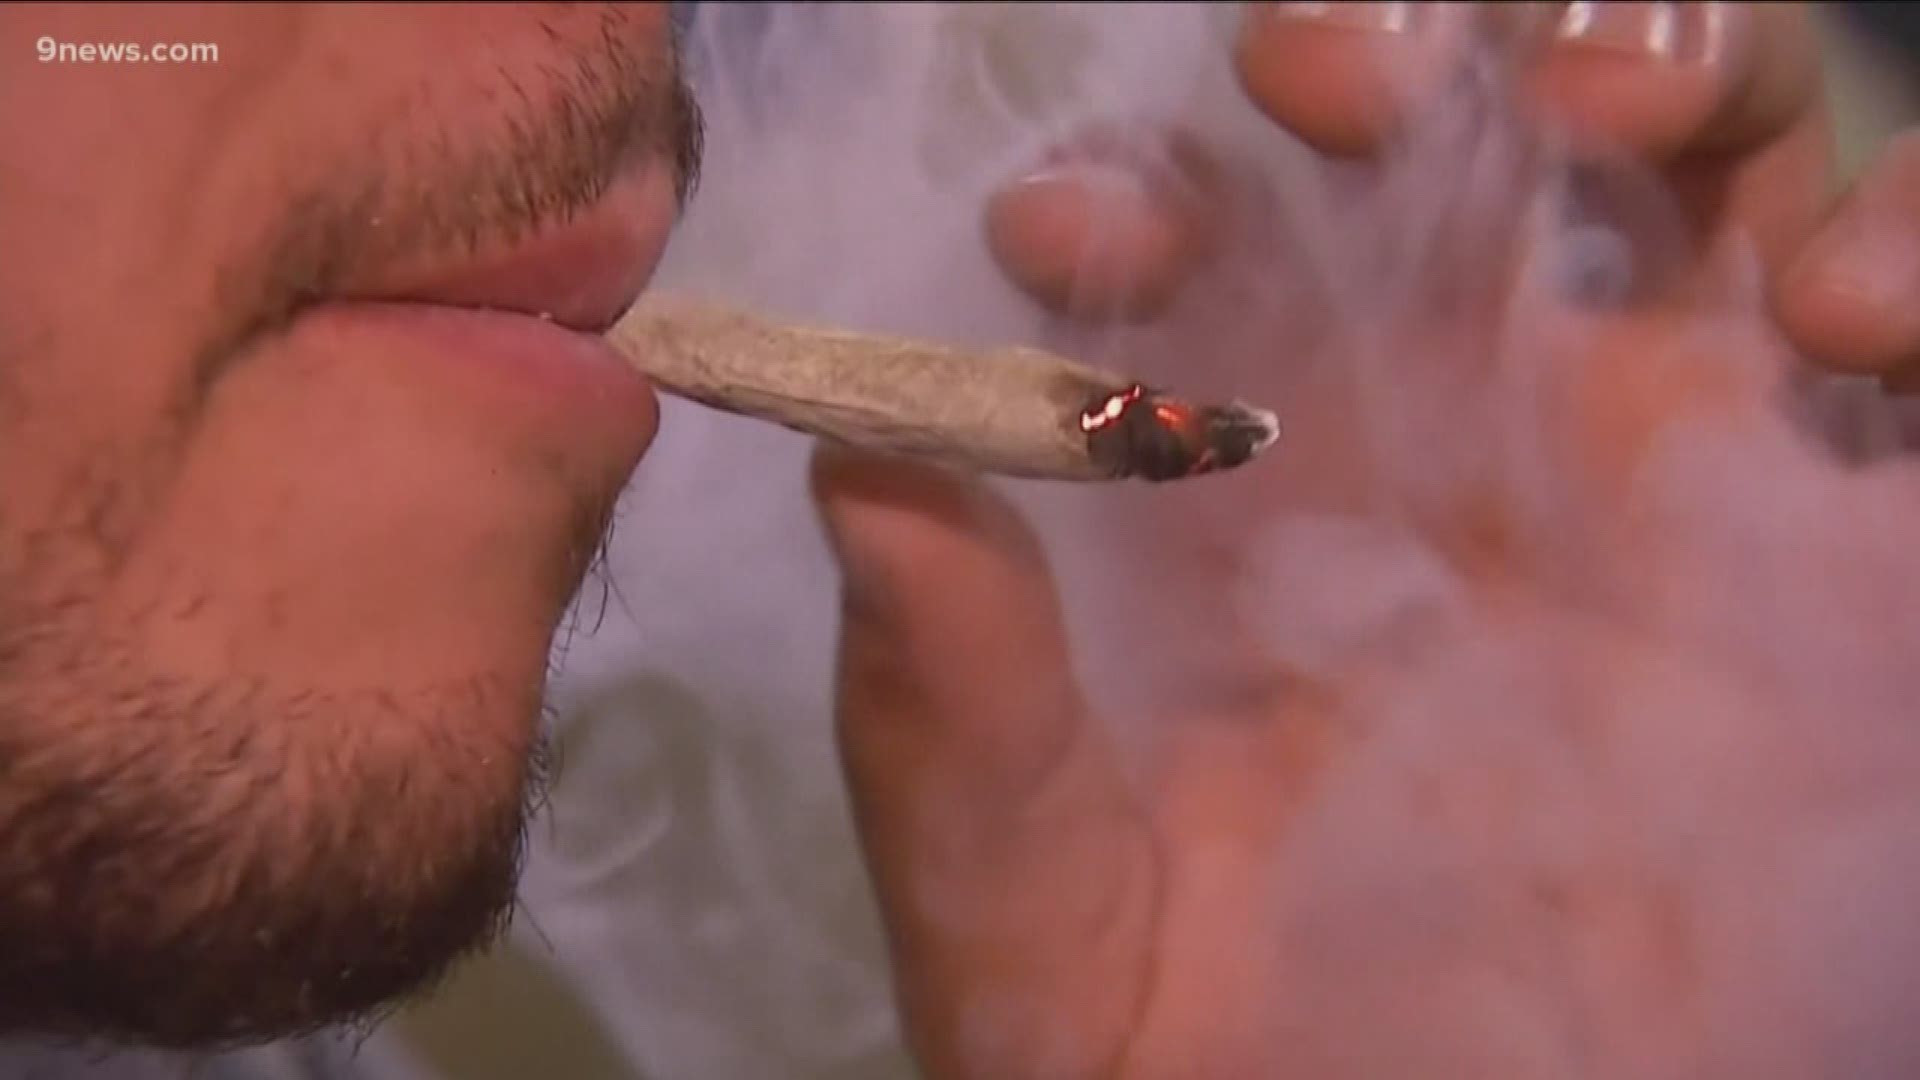 Marijuana delivery is now legal in Colorado, but you can't order pot like a pizza just quite yet